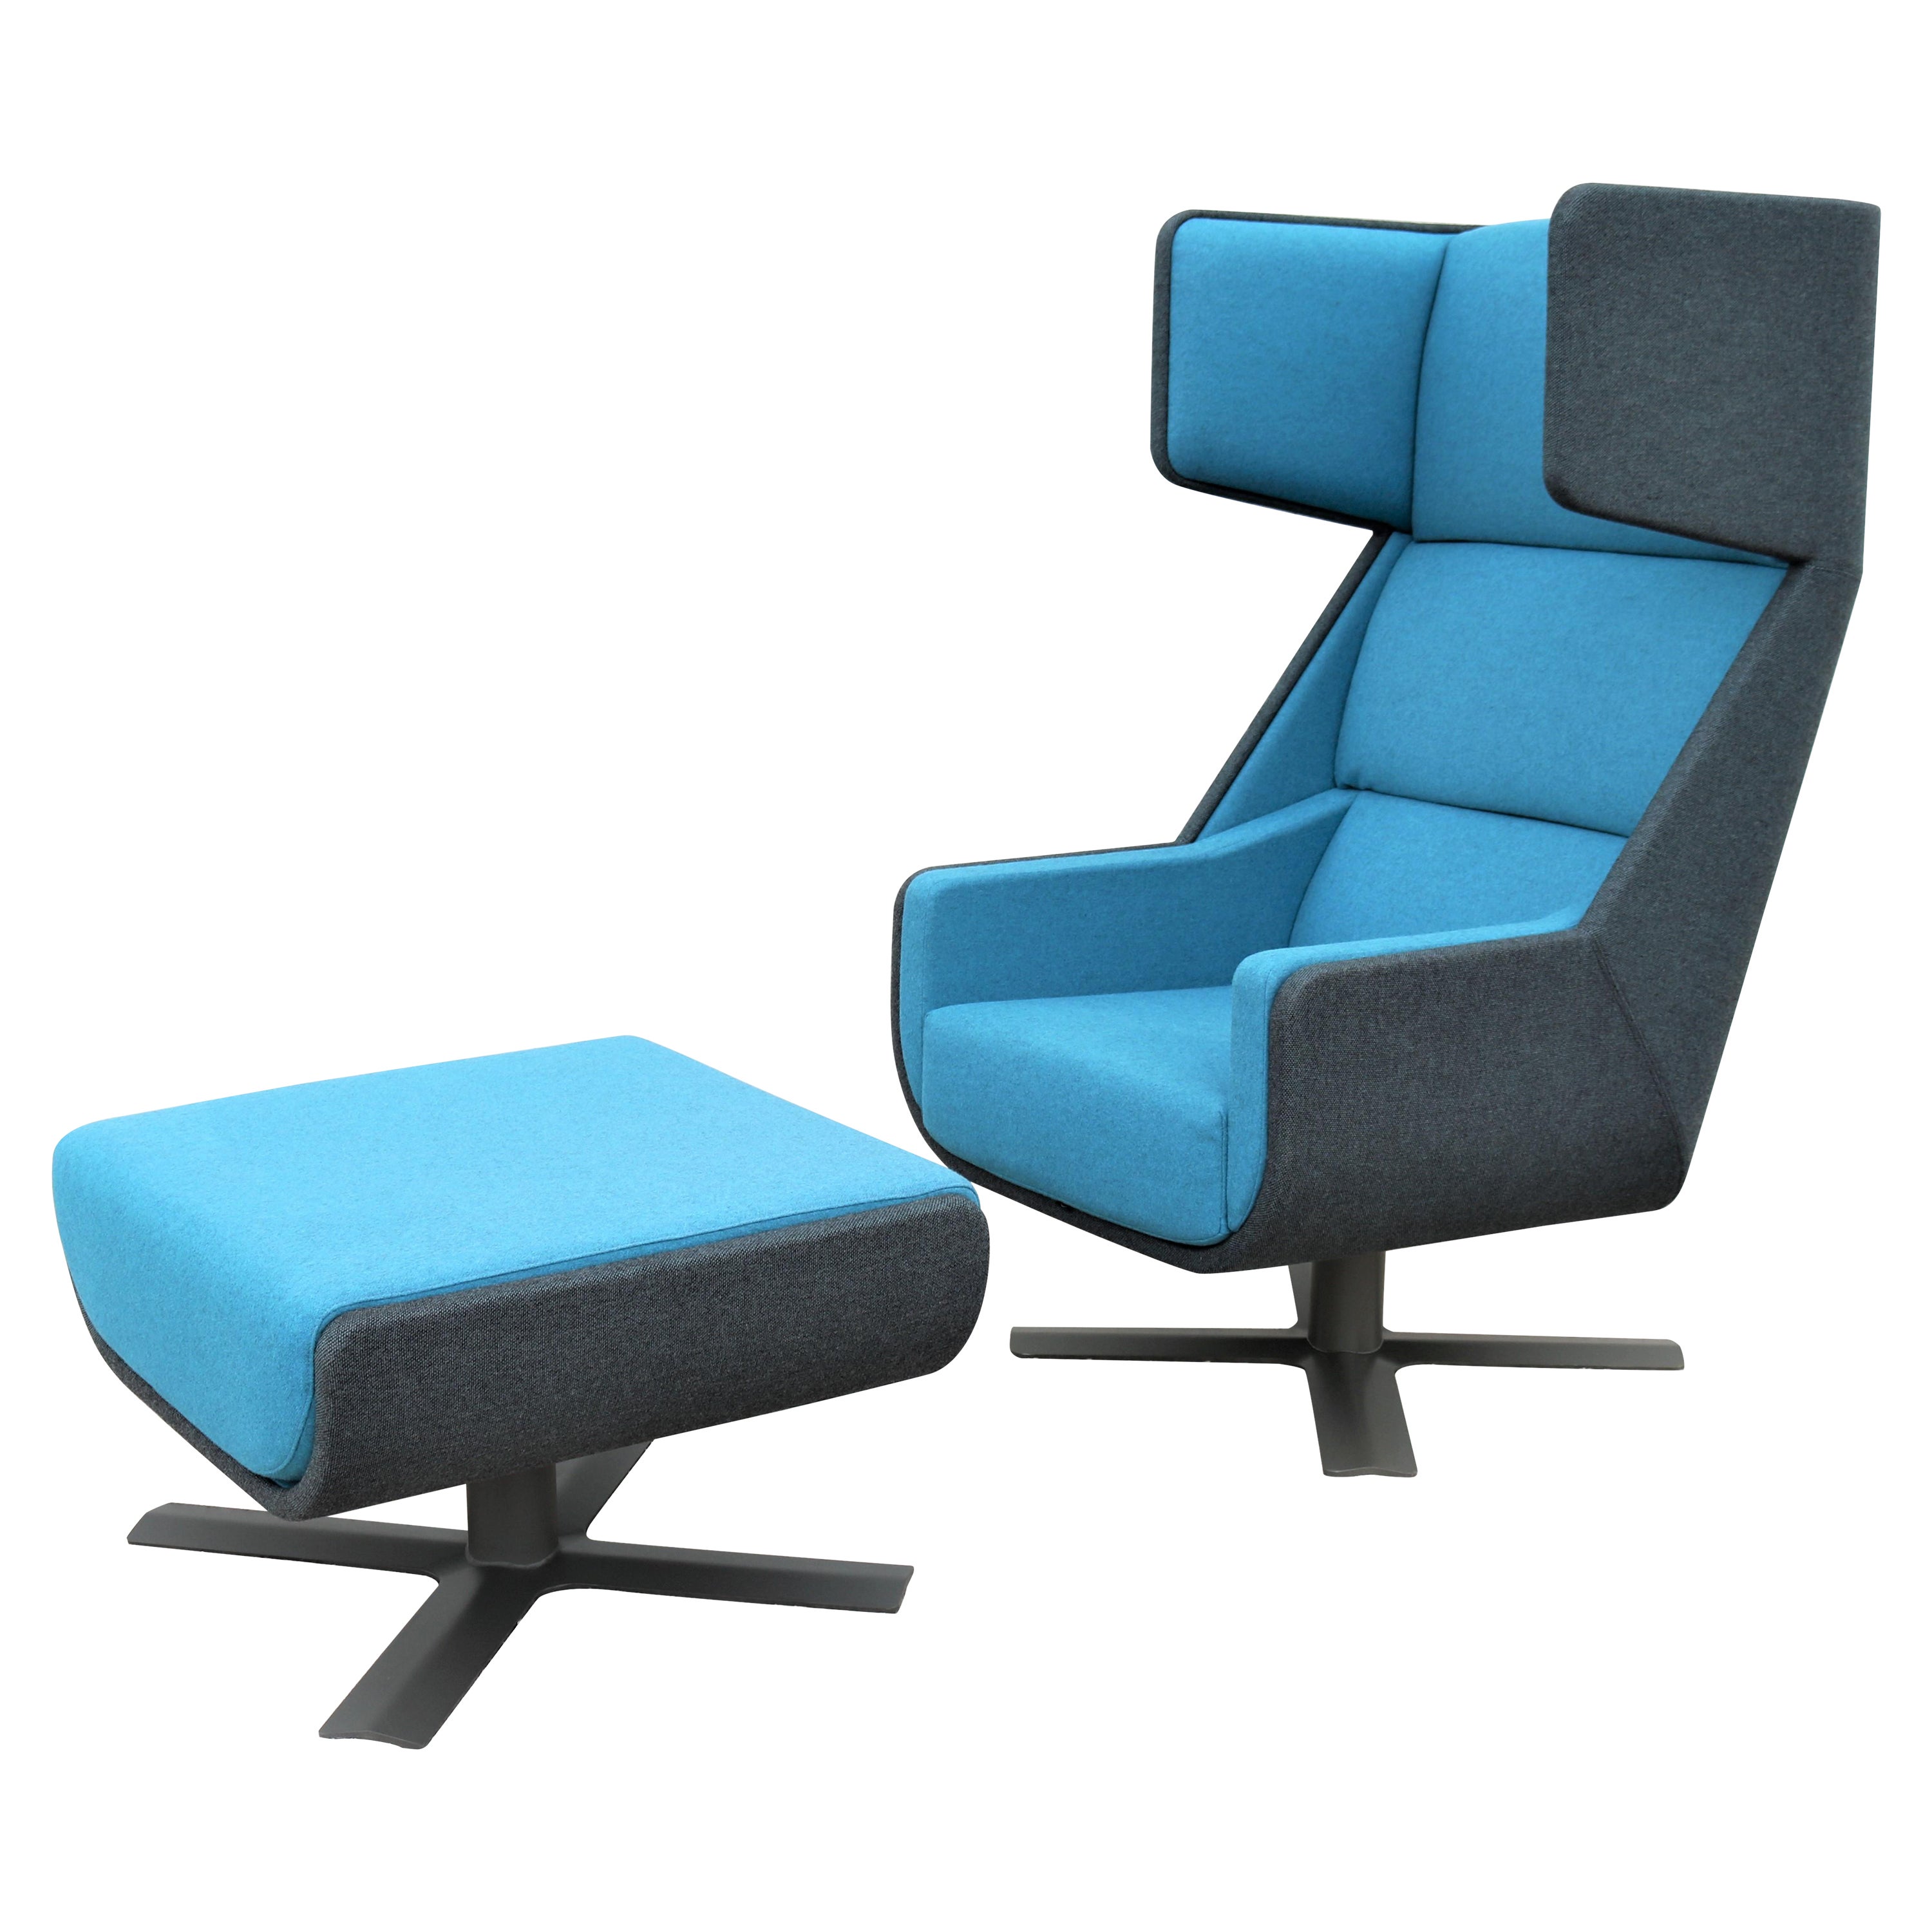 Modern Axel Enthoven for BuzziSpace Blue BuzziMe Swivel Lounge Chair and Ottoman